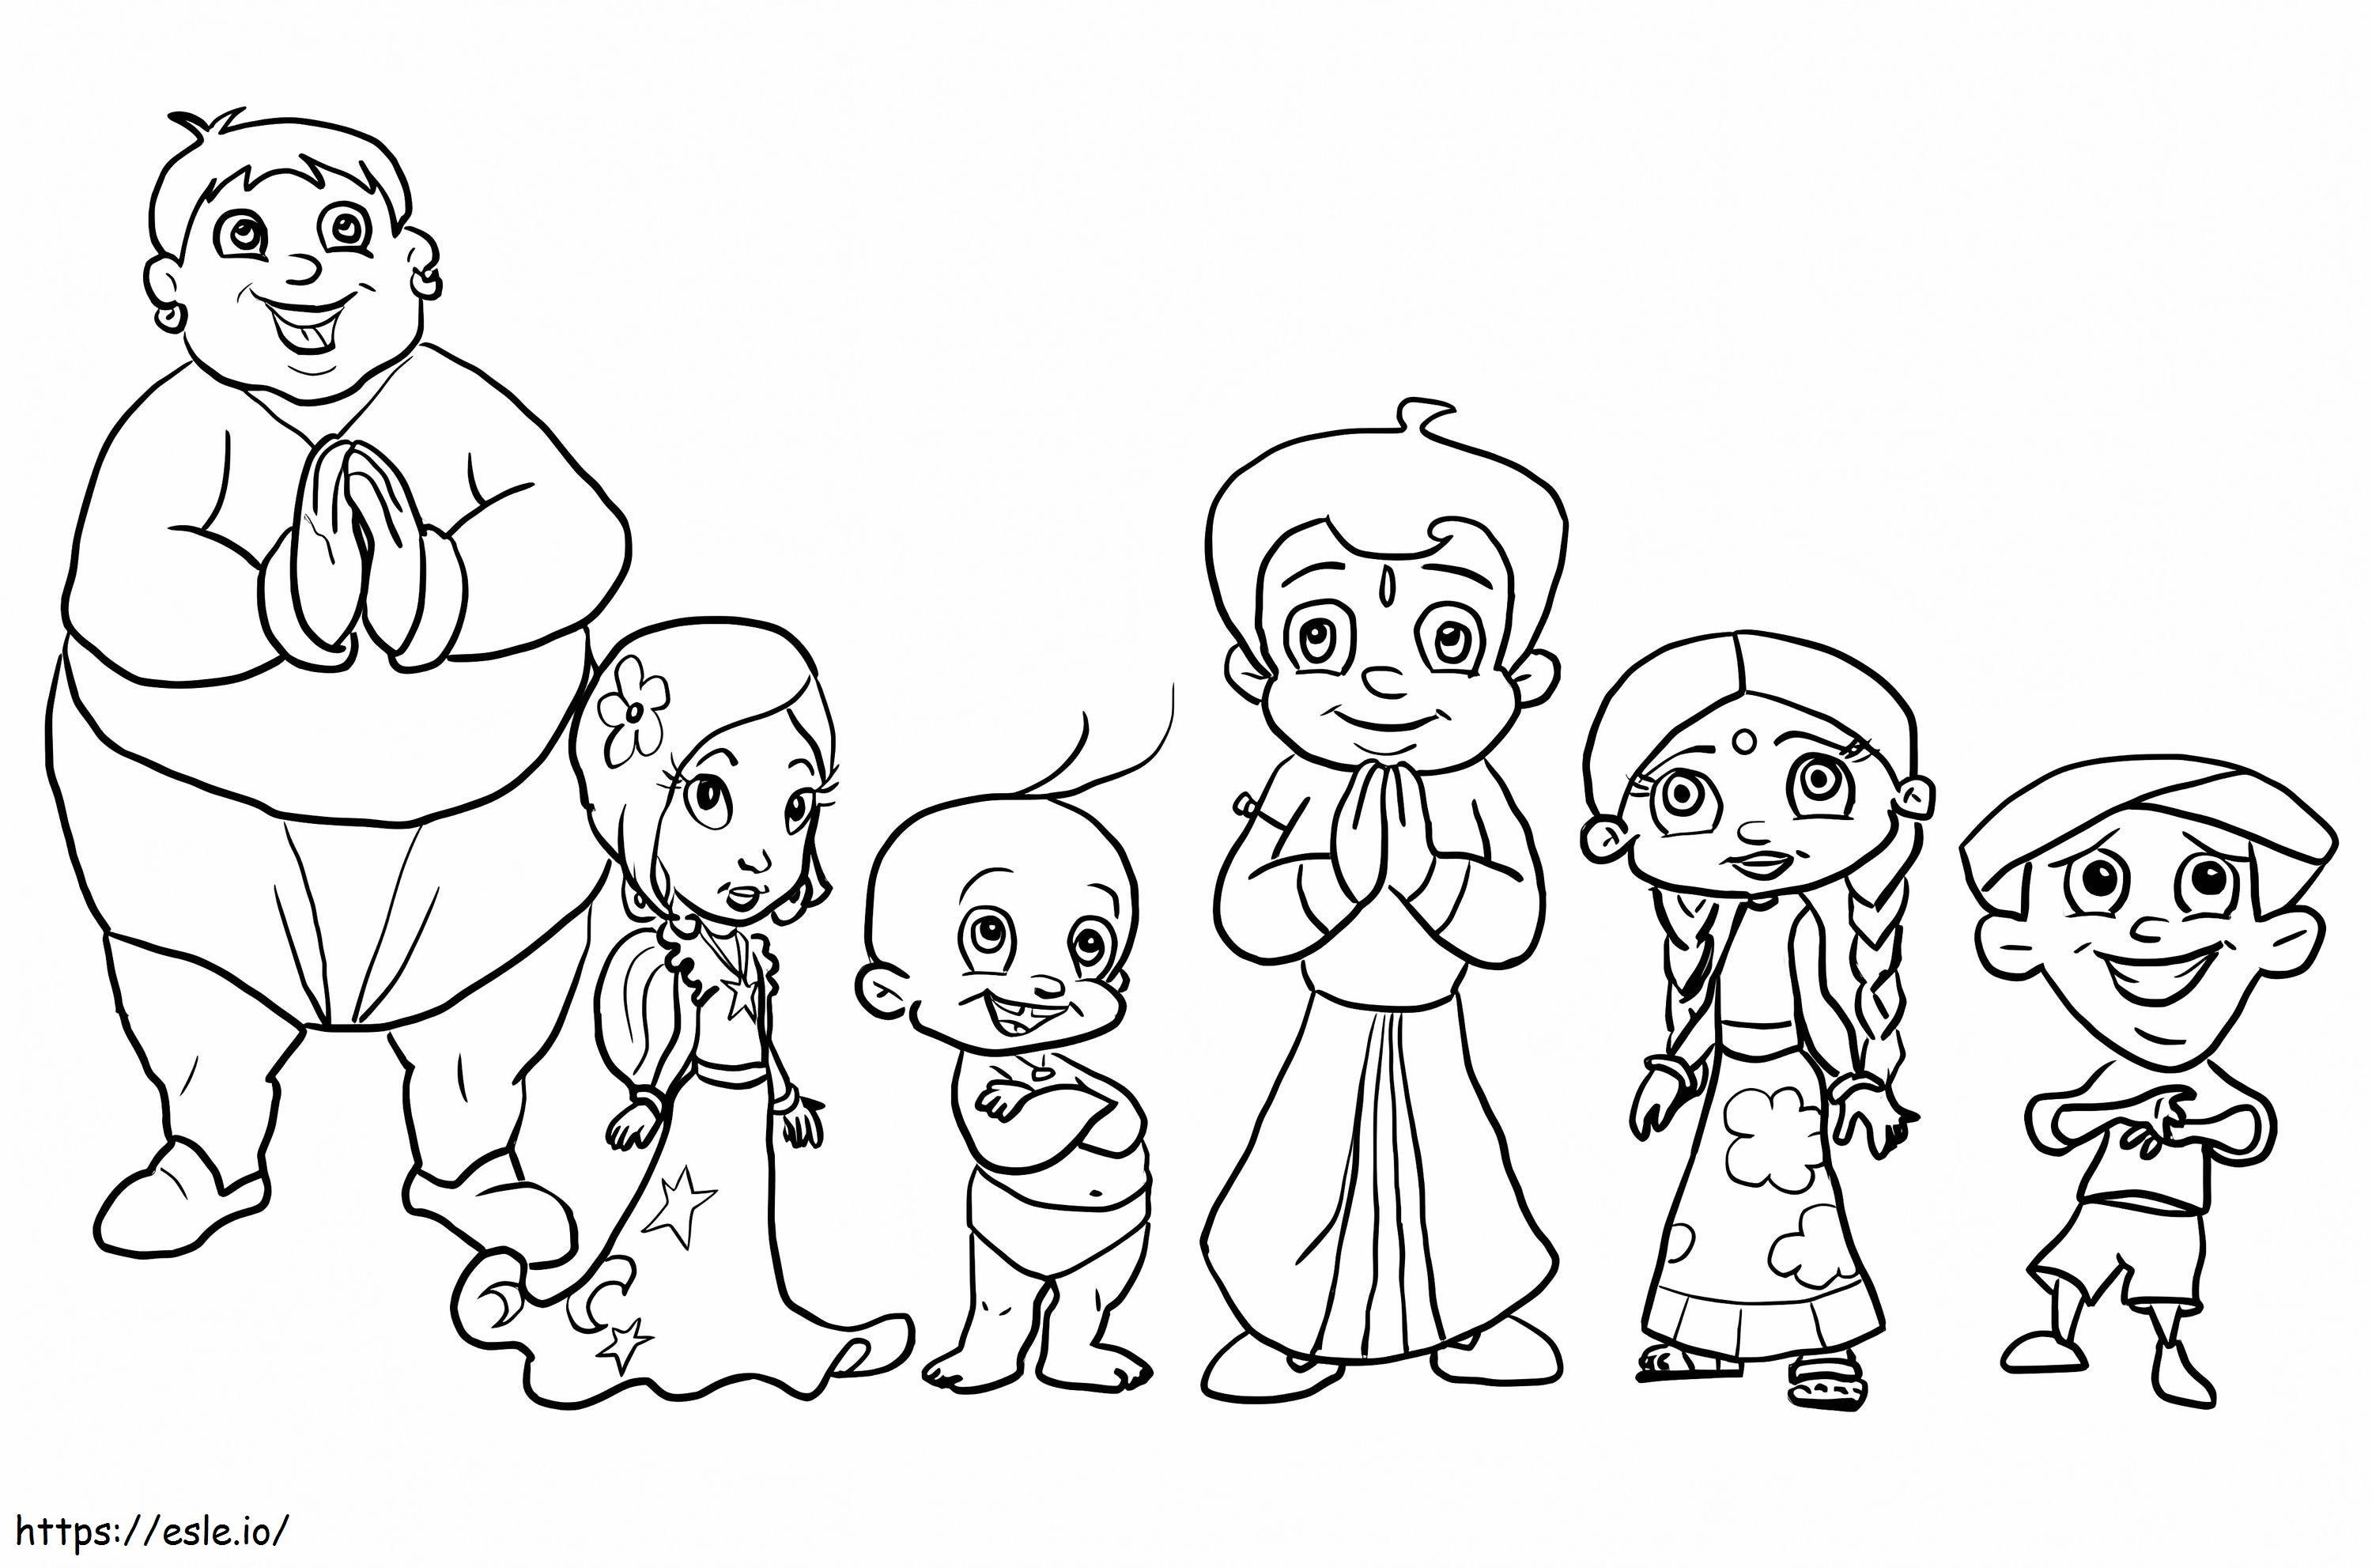 Chhota Bheem Characters Smiling coloring page